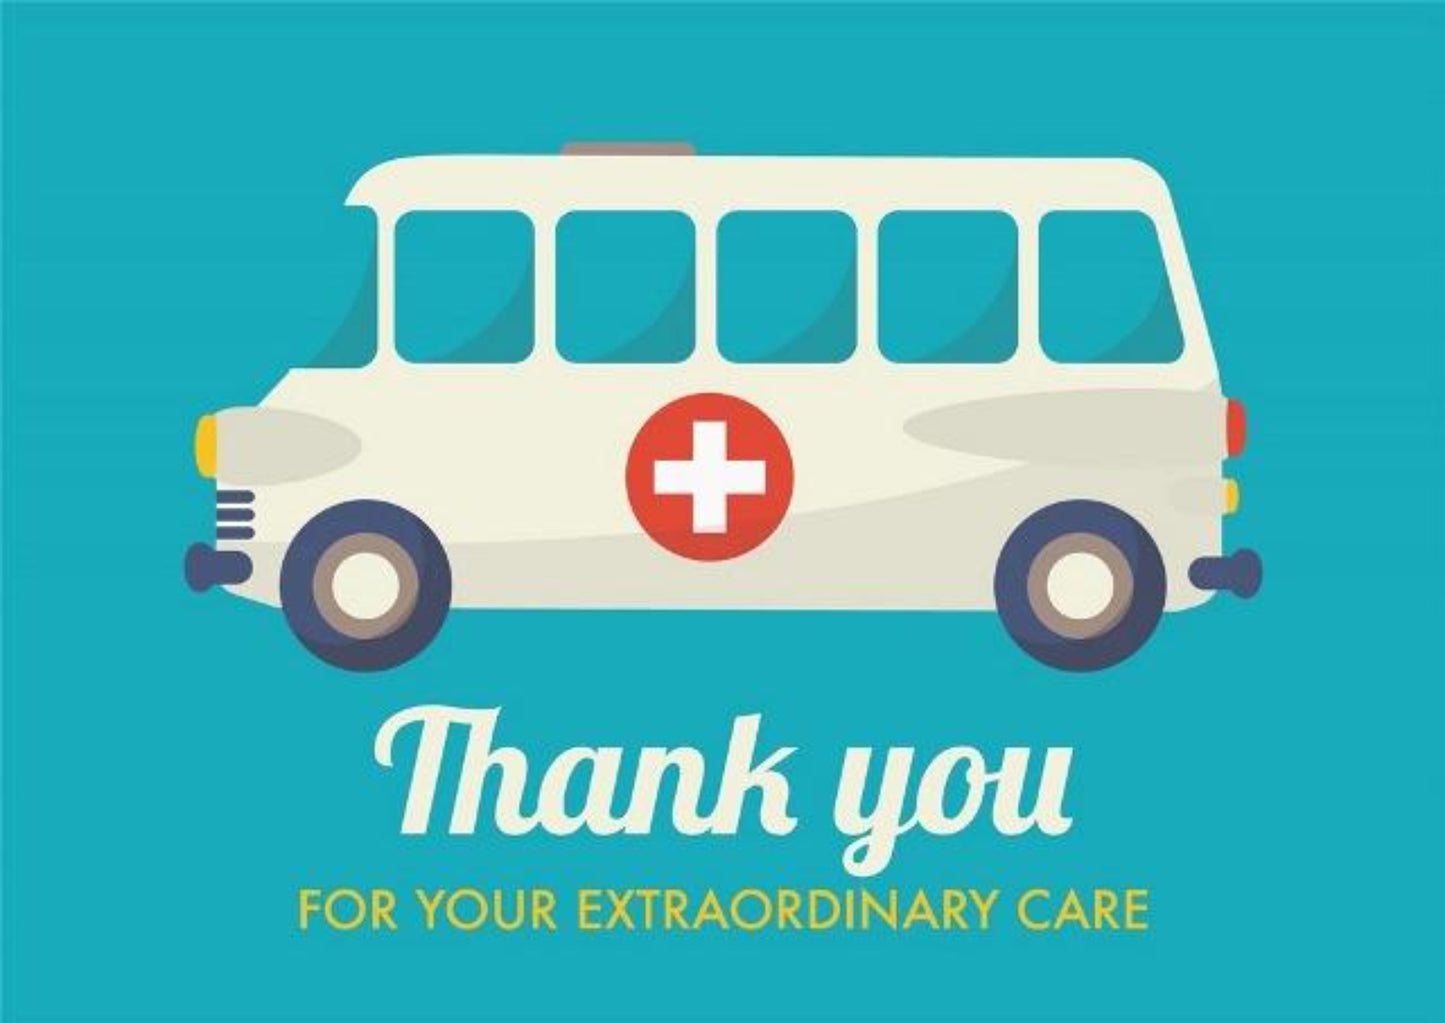 Thank You For Your Extraordinary Care - Frontline Workers Cards.